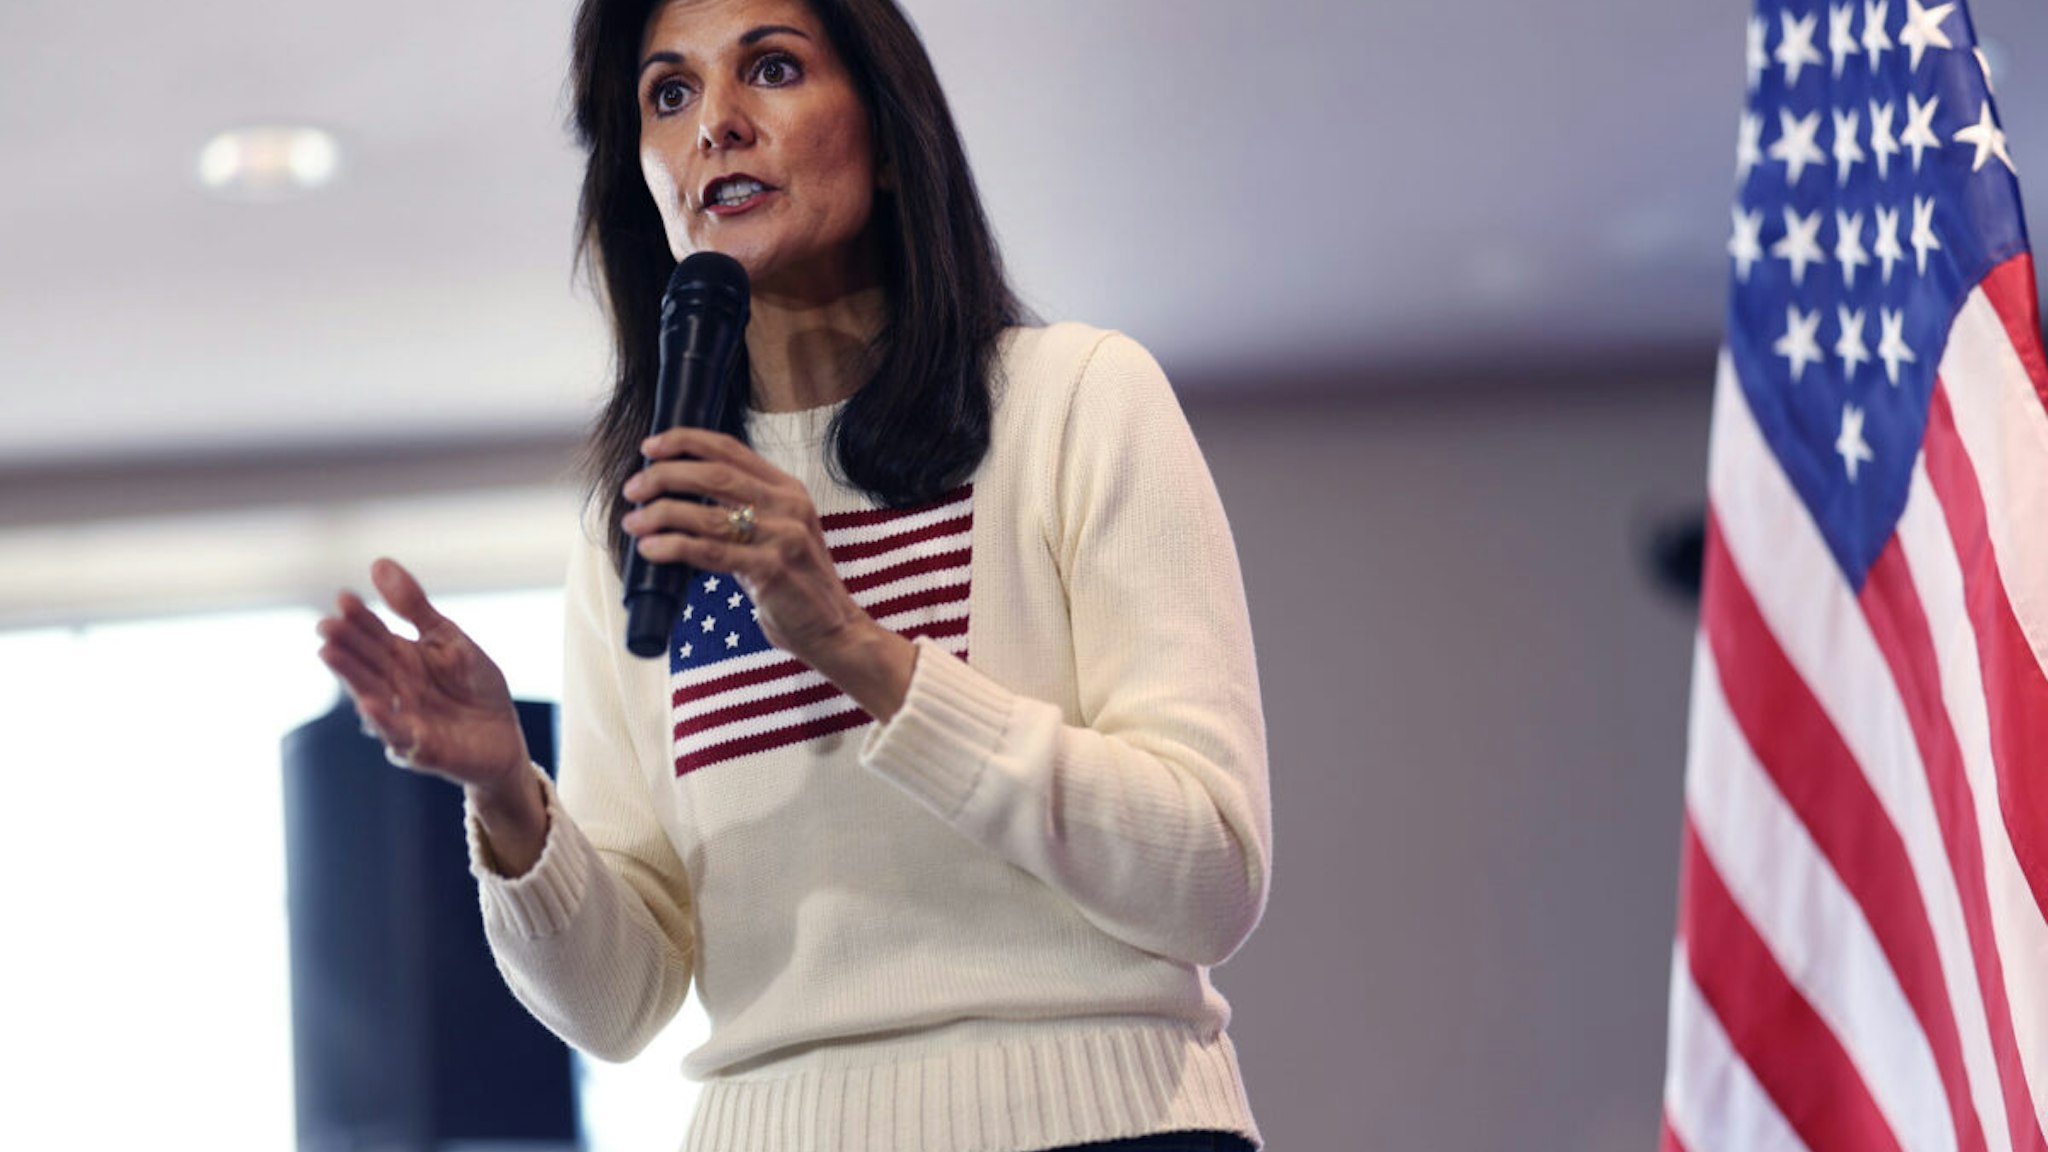 NEVADA, IOWA - DECEMBER 18: Republican presidential candidate former U.N. Ambassador Nikki Haley addresses the crowd during a campaign stop at the Nevada Fairgrounds community building on December 18, 2023 in Nevada, Iowa. Iowa Republicans will be the first to select their party's nominee for the 2024 presidential race when they go to caucus on January 15, 2024.